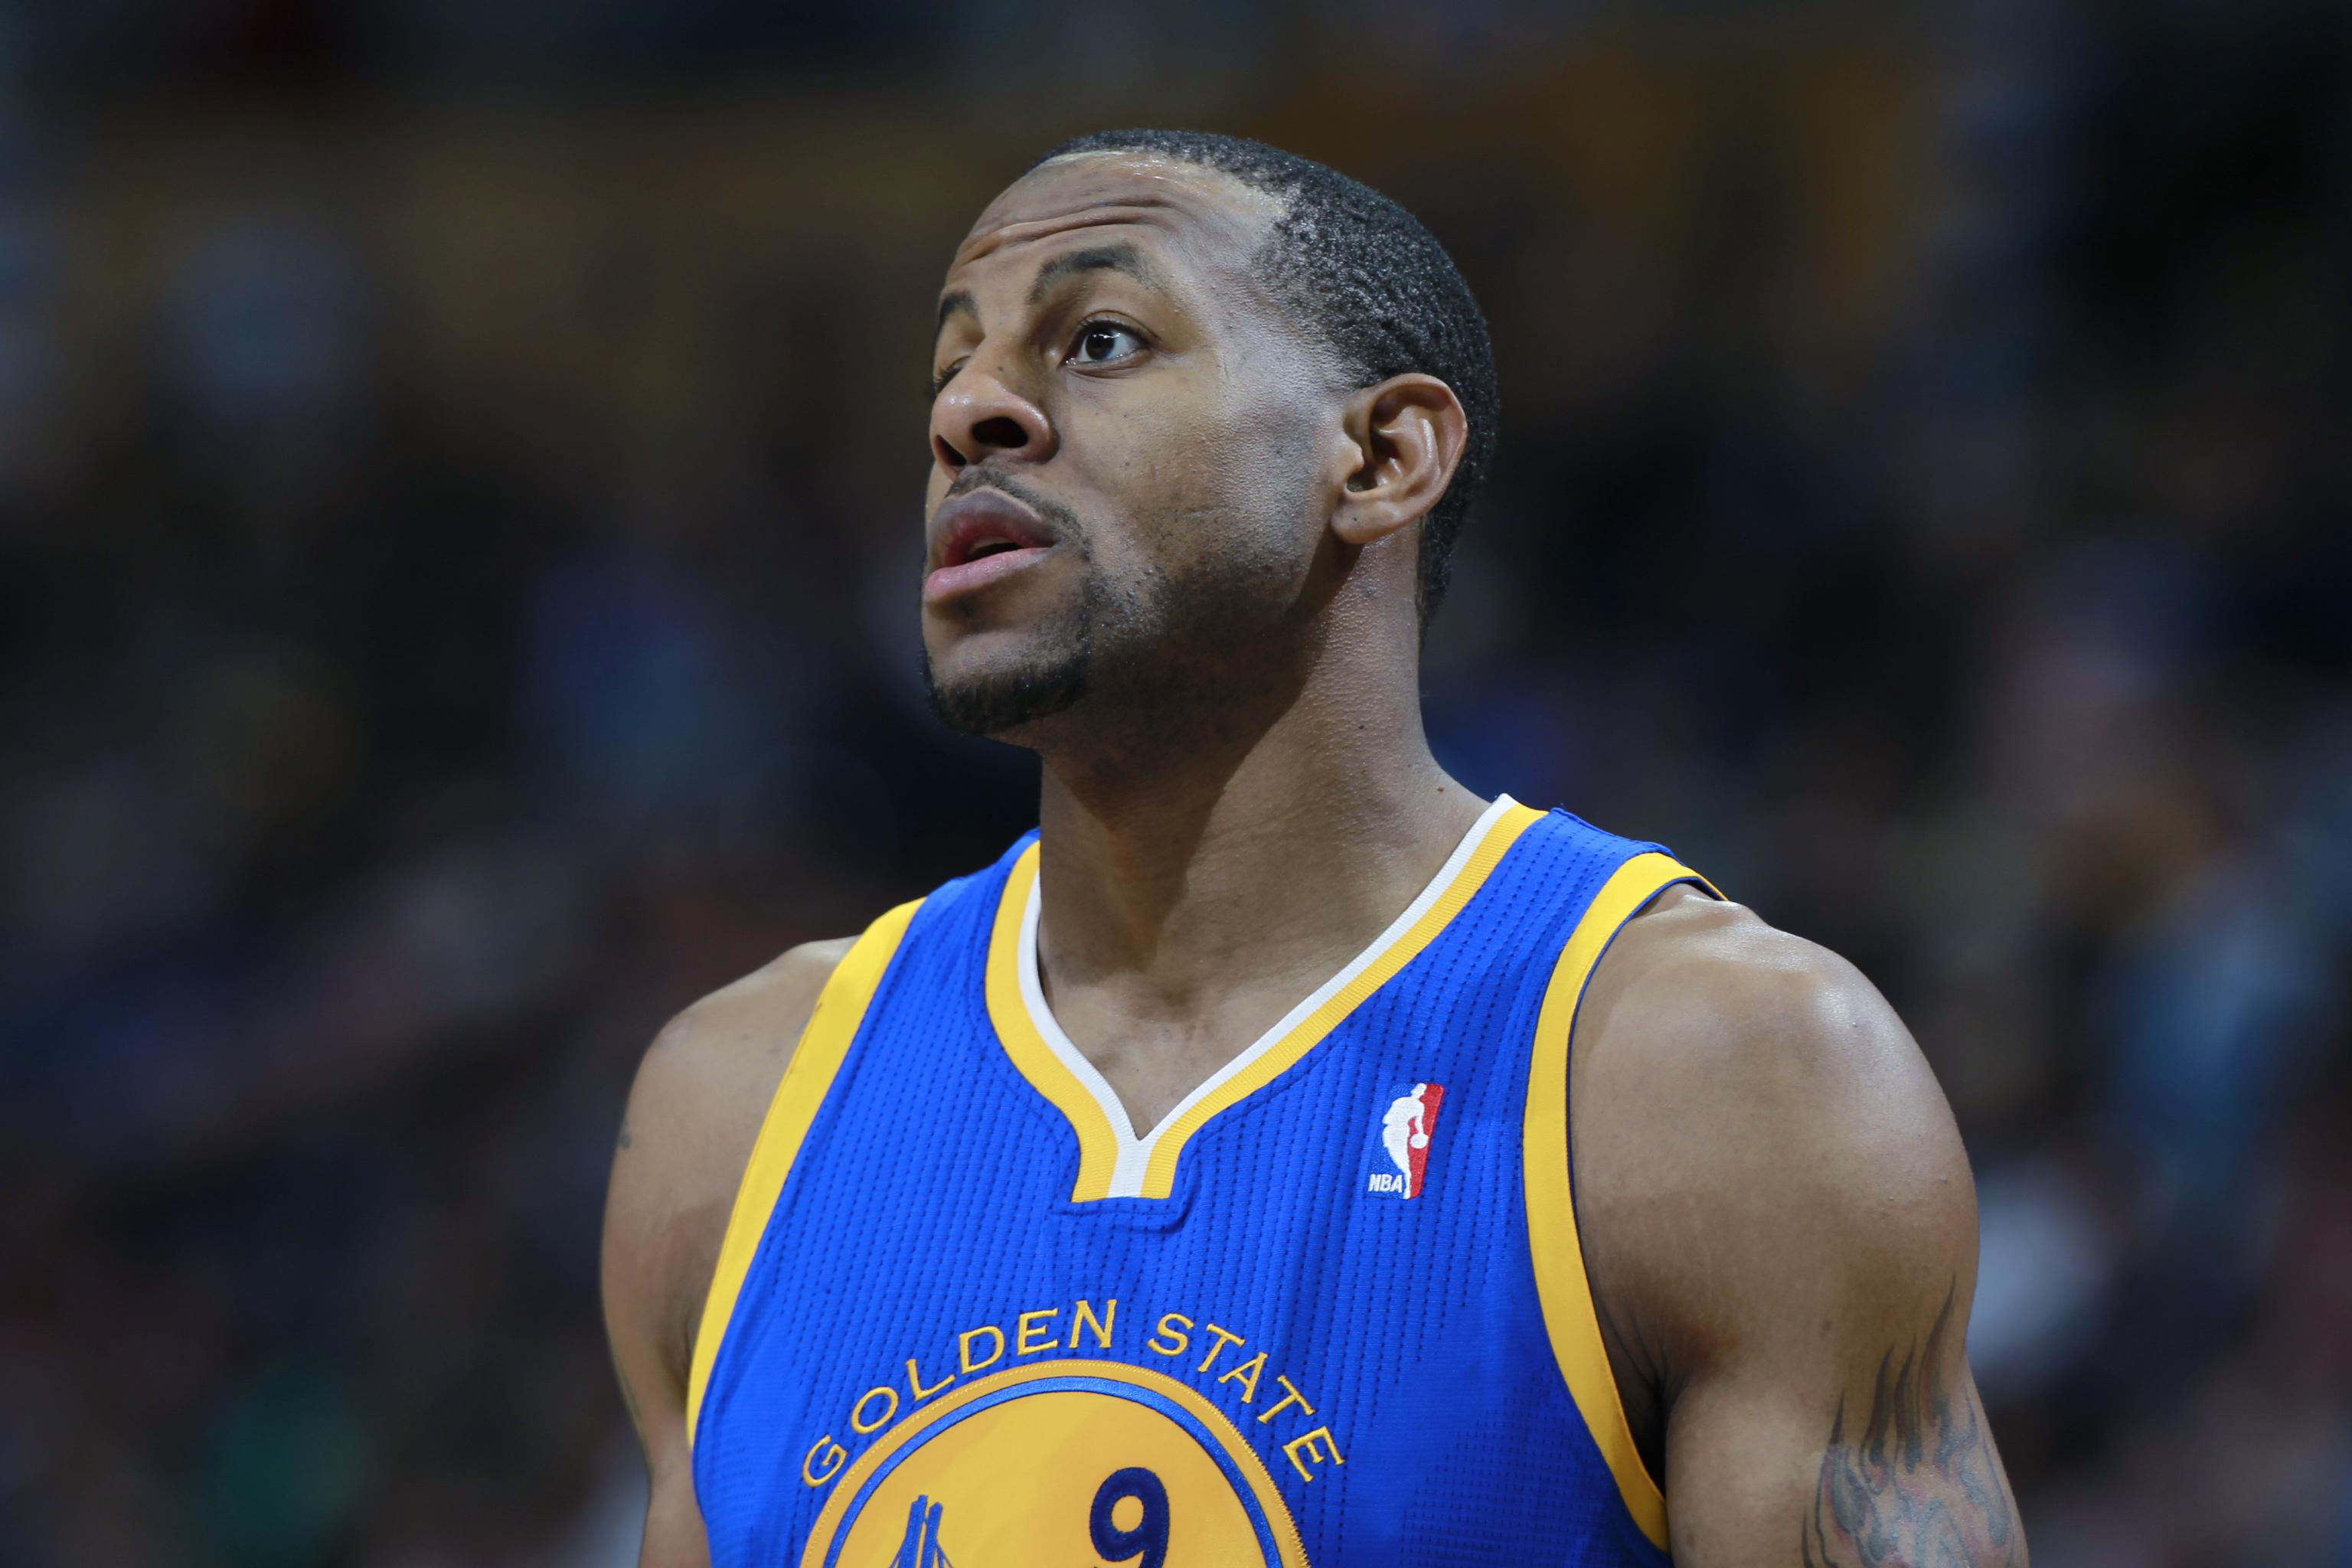 Former Illinois prep star Andre Iguodala to have number retired by